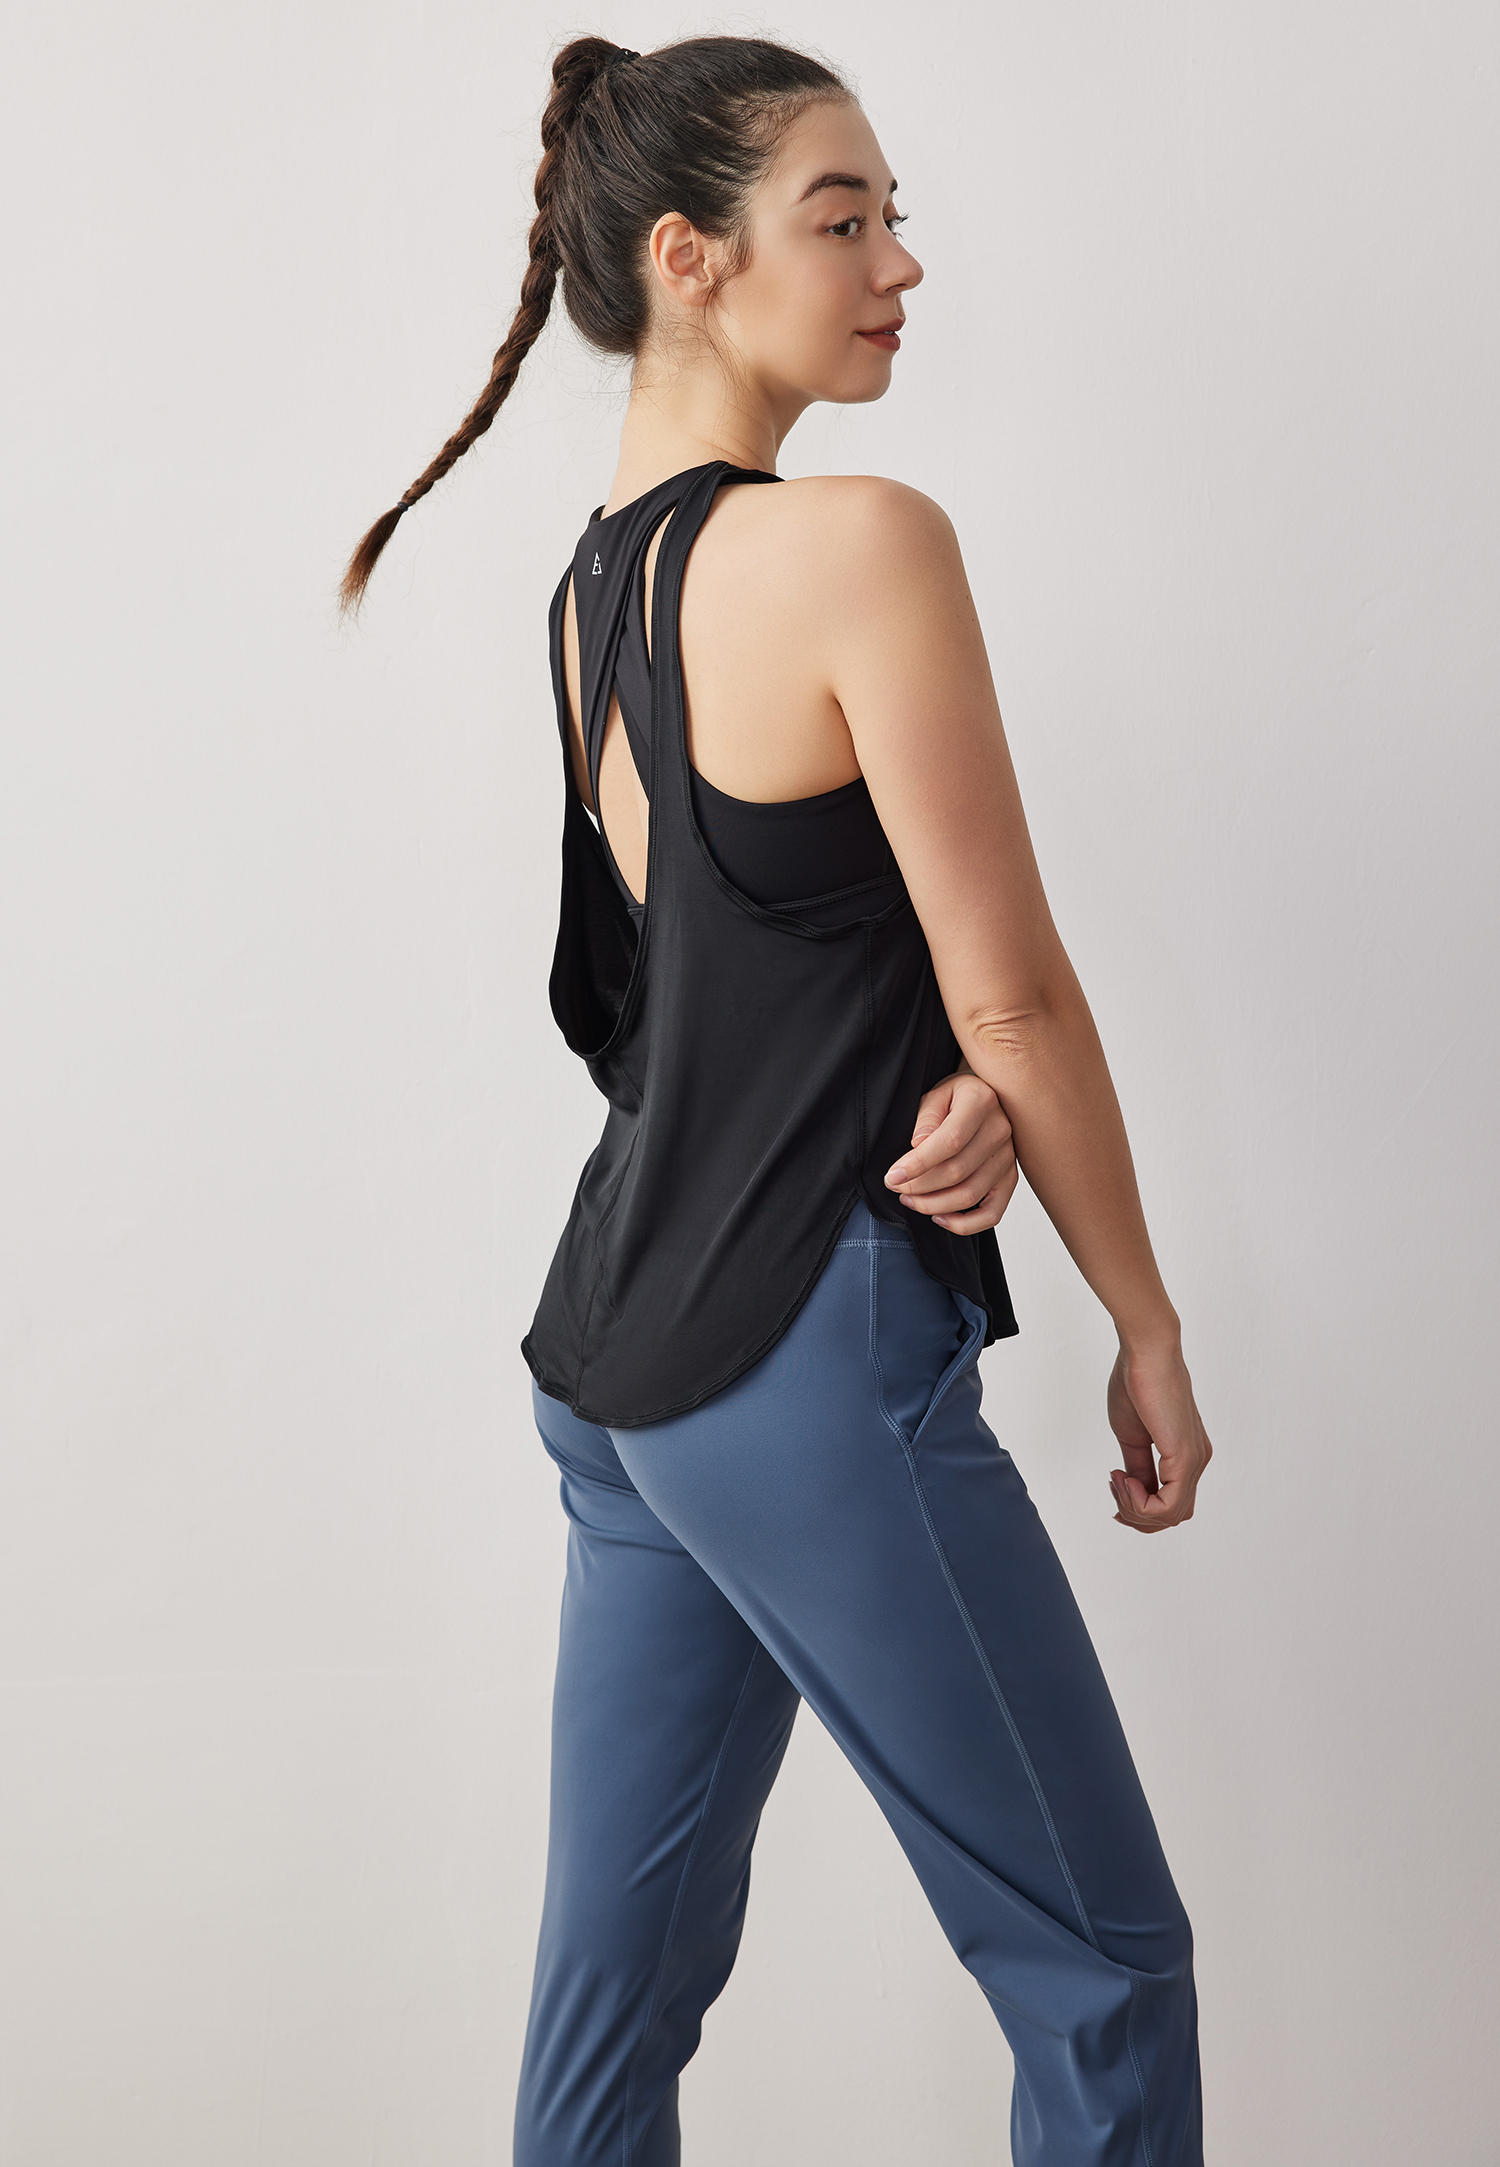 Surround 2-in-1 Bra with Tank